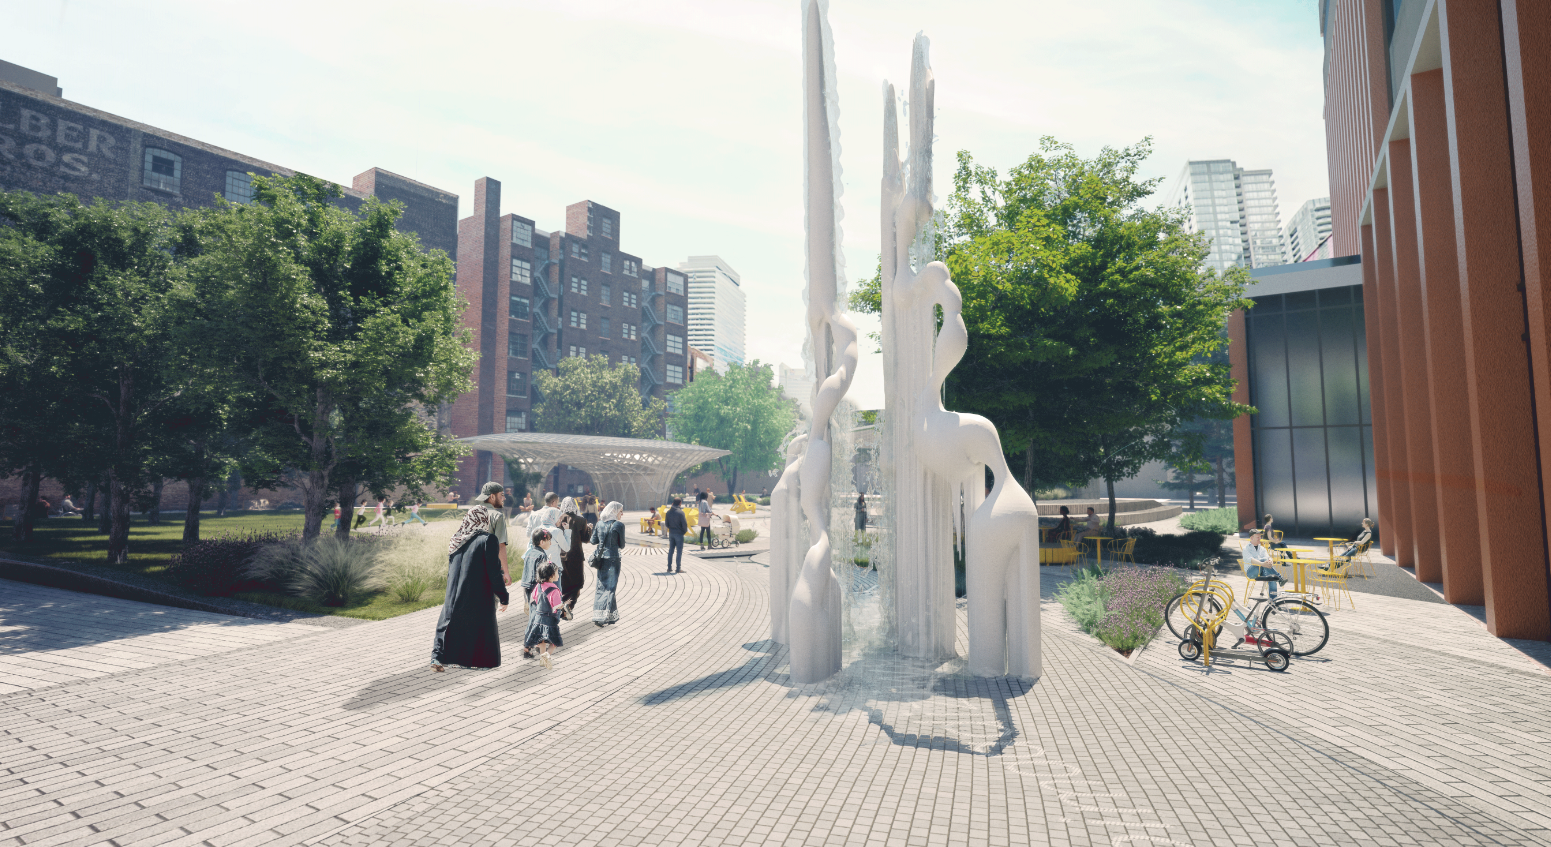 A tall flowing sculpture marks the southeast gateway of River Park. Visitors head toward the central space, admiring the sculpture. Others are seated in the vibrant, yellow patio furniture in between large trees with lush planting and the adjacent tall building.